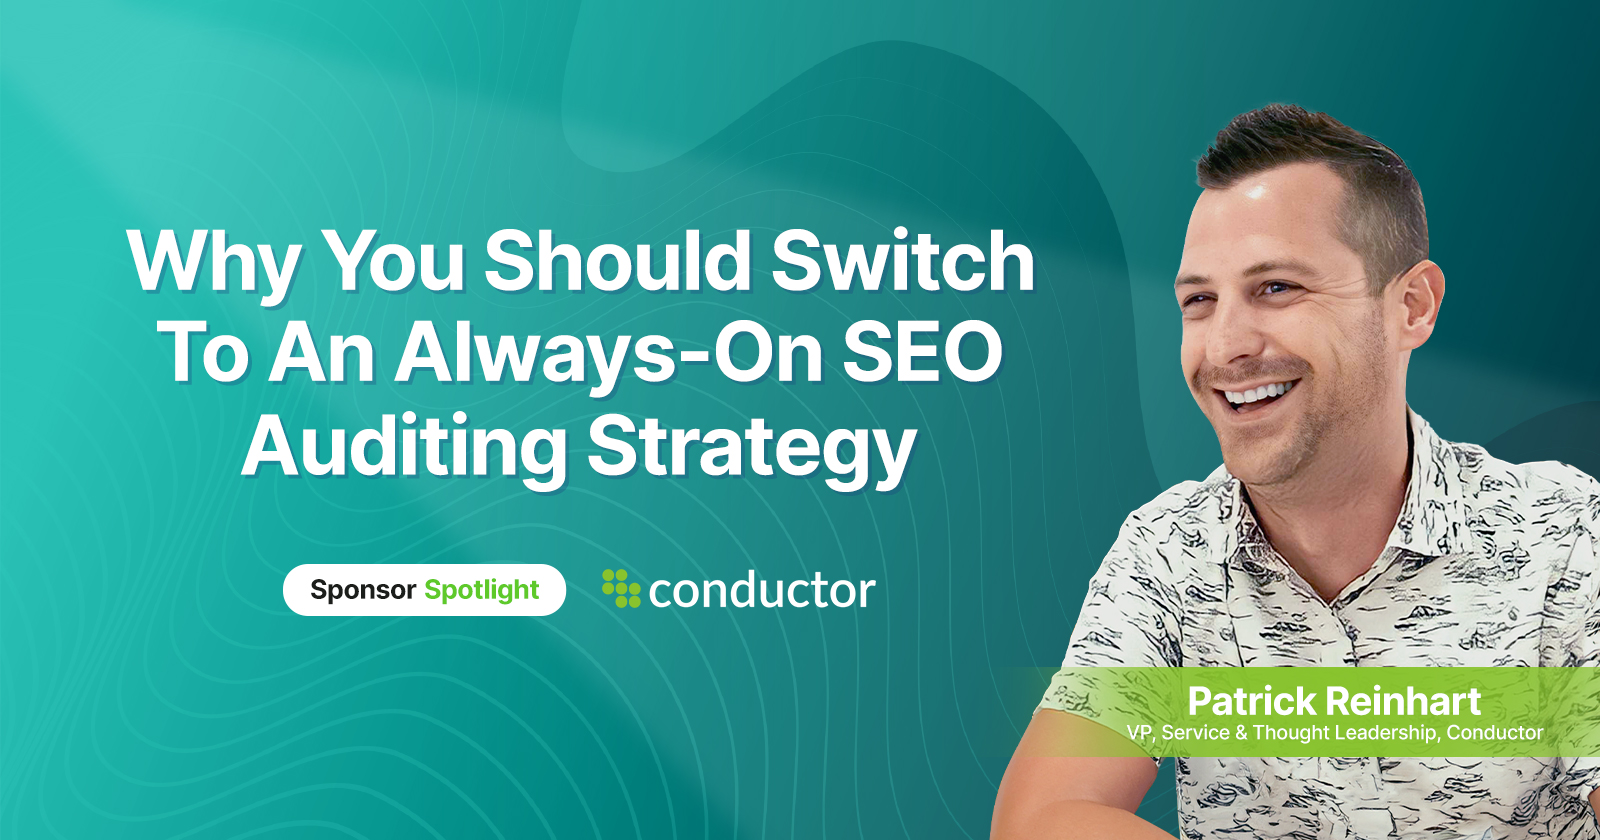 why-you-should-switch-to-an-always-on-seo-auditing-strategy